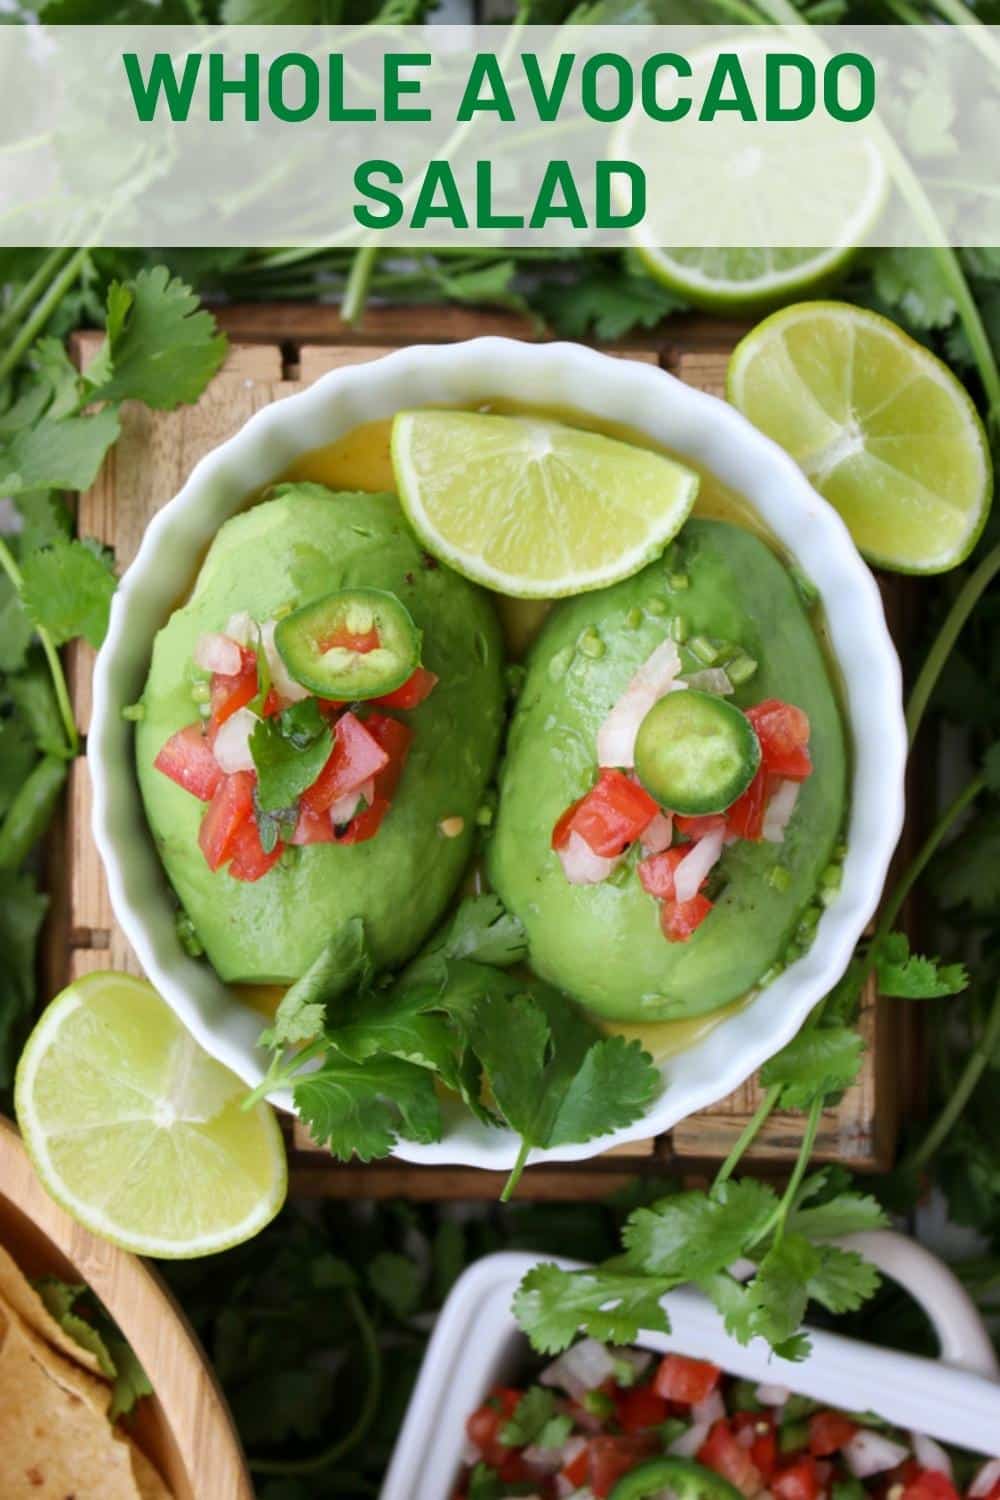 Dress up a whole avocado with this super simple salad recipe made with a whole avocado and a cilantro vinaigrette. via @krazykitchenmom